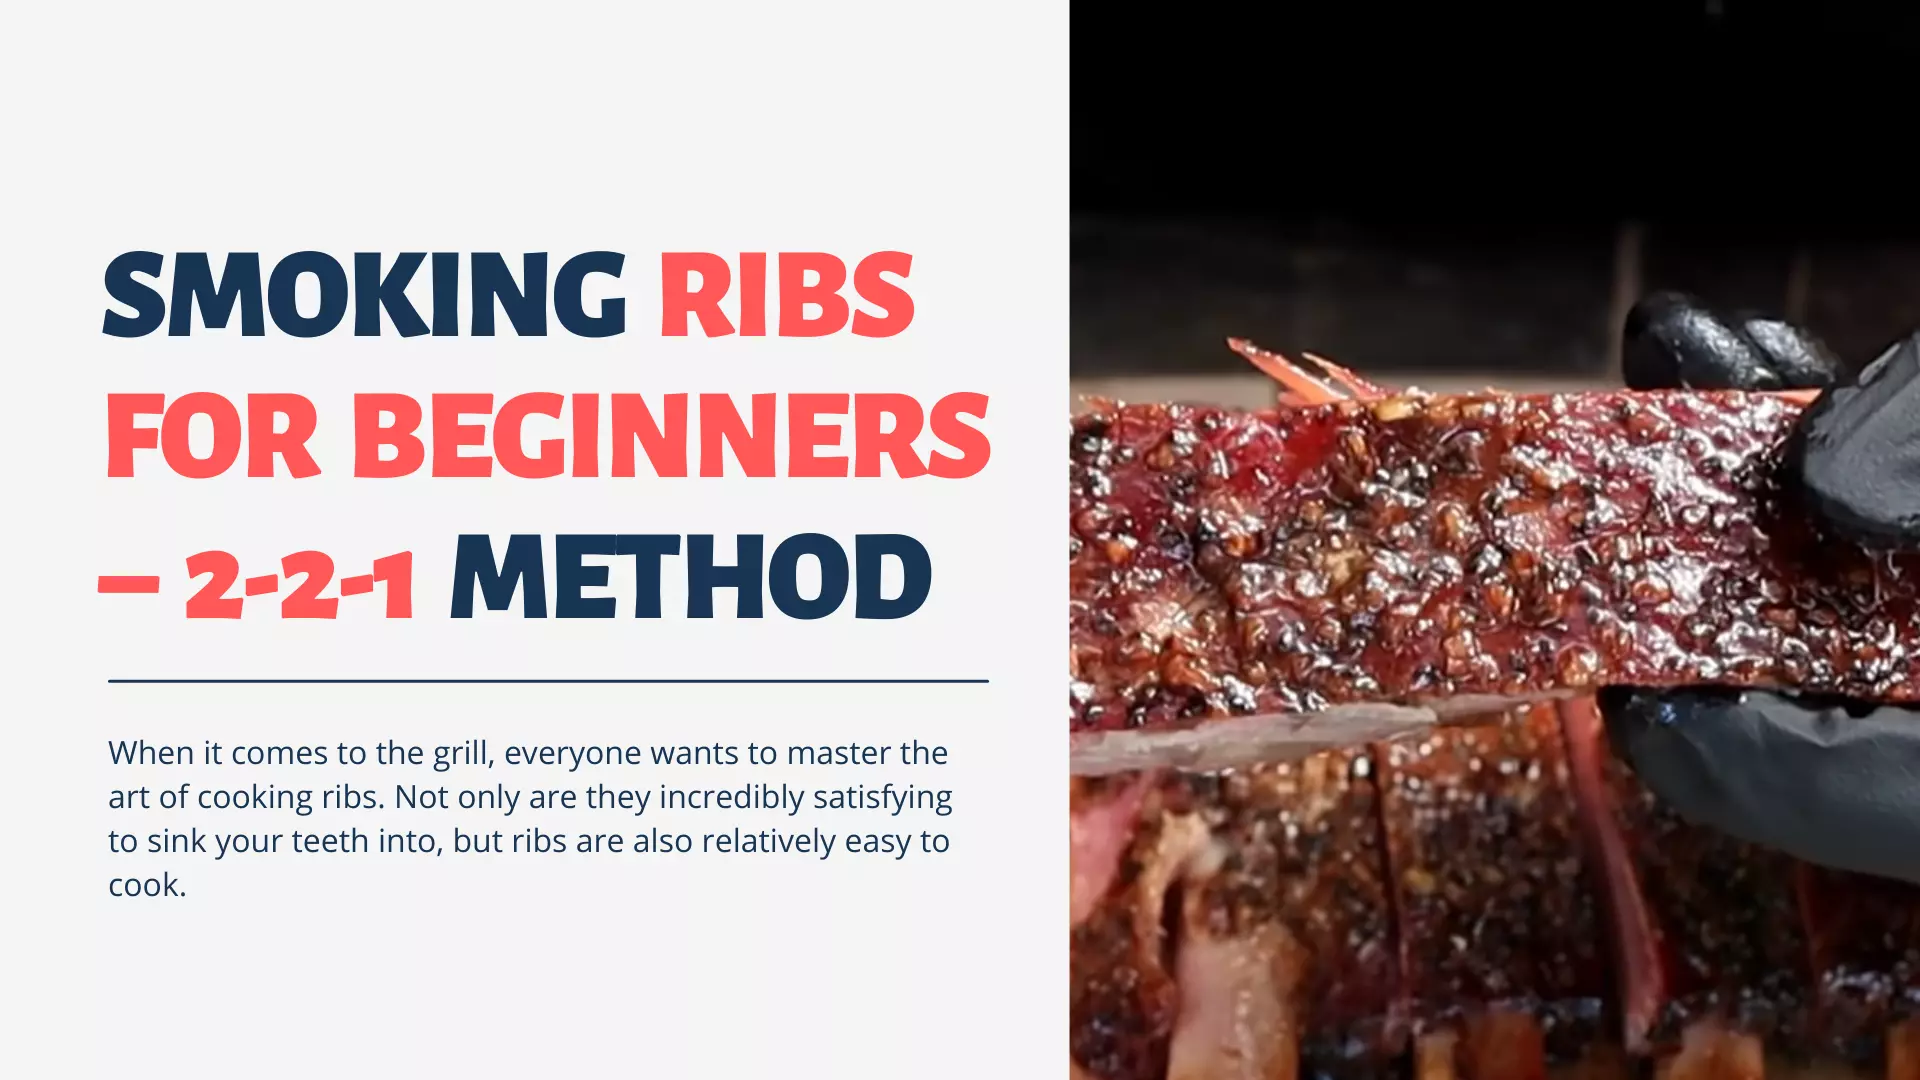 SMOKING RIBS FOR BEGINNERS